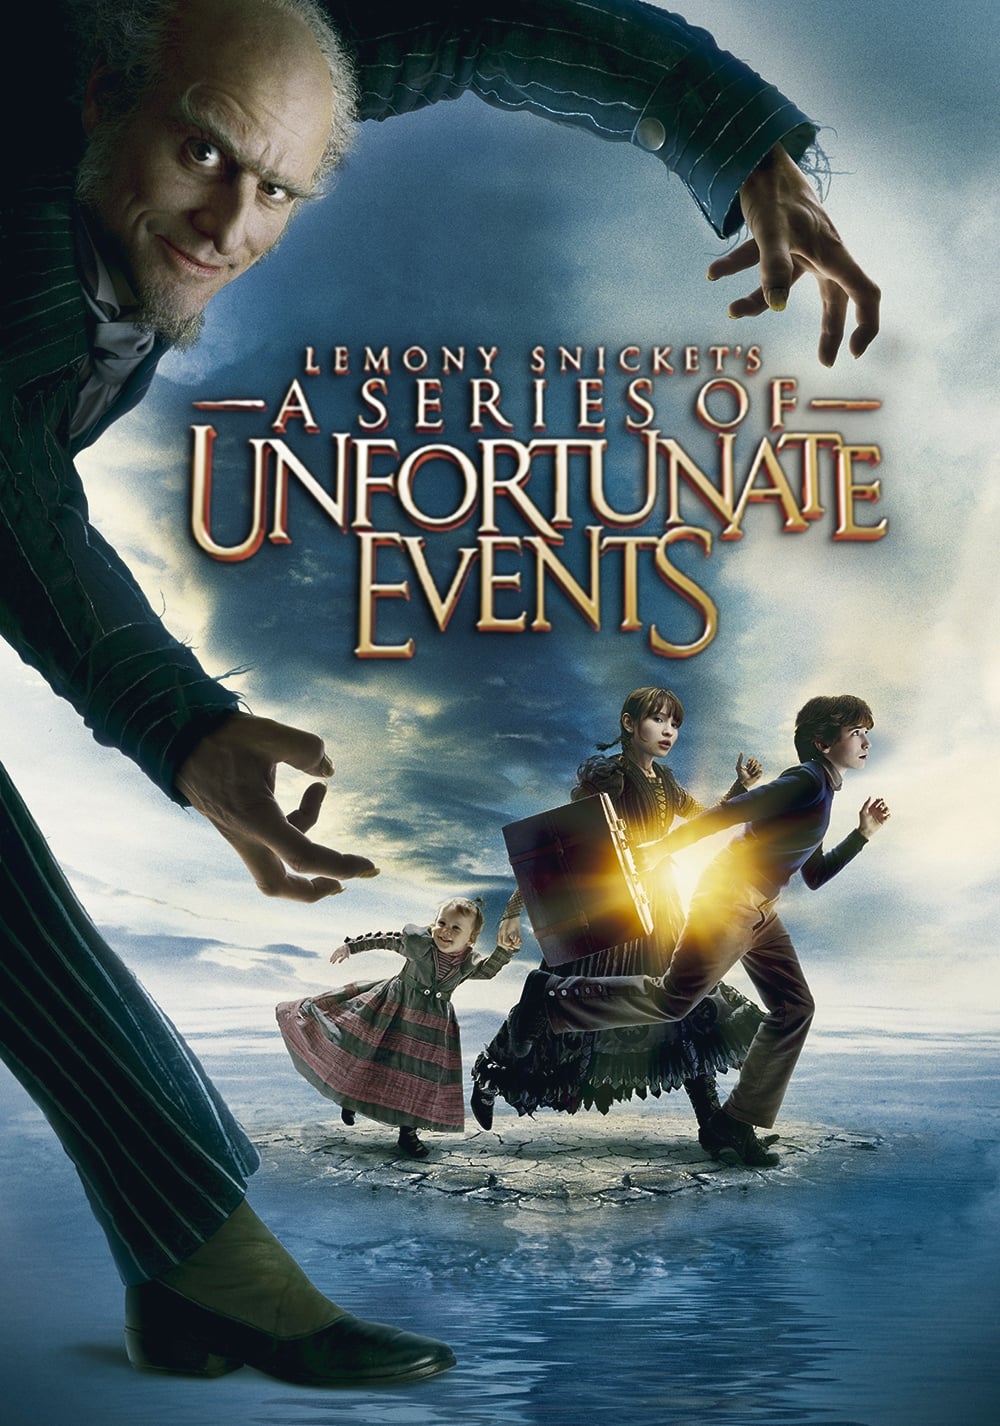 Lemony Snicket's A Series of Unfortunate Events Movie poster